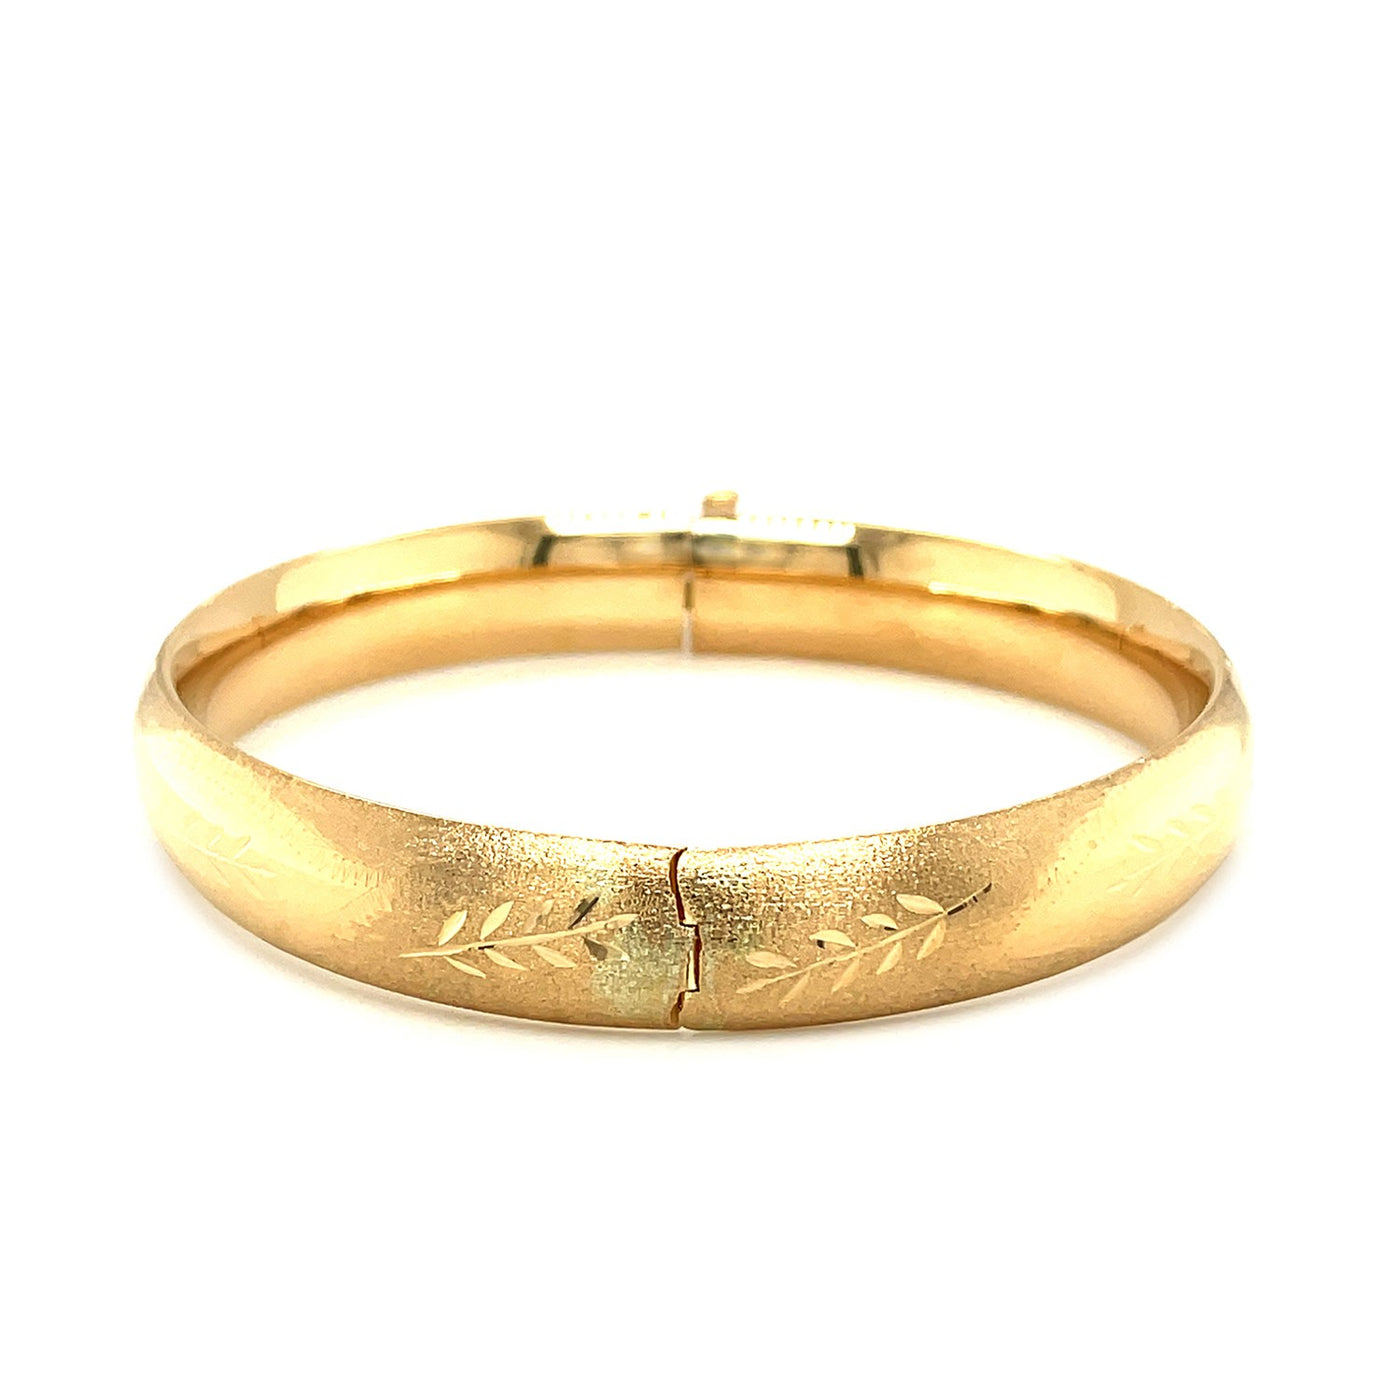 The Classic Floral Cut Bangle 10mm